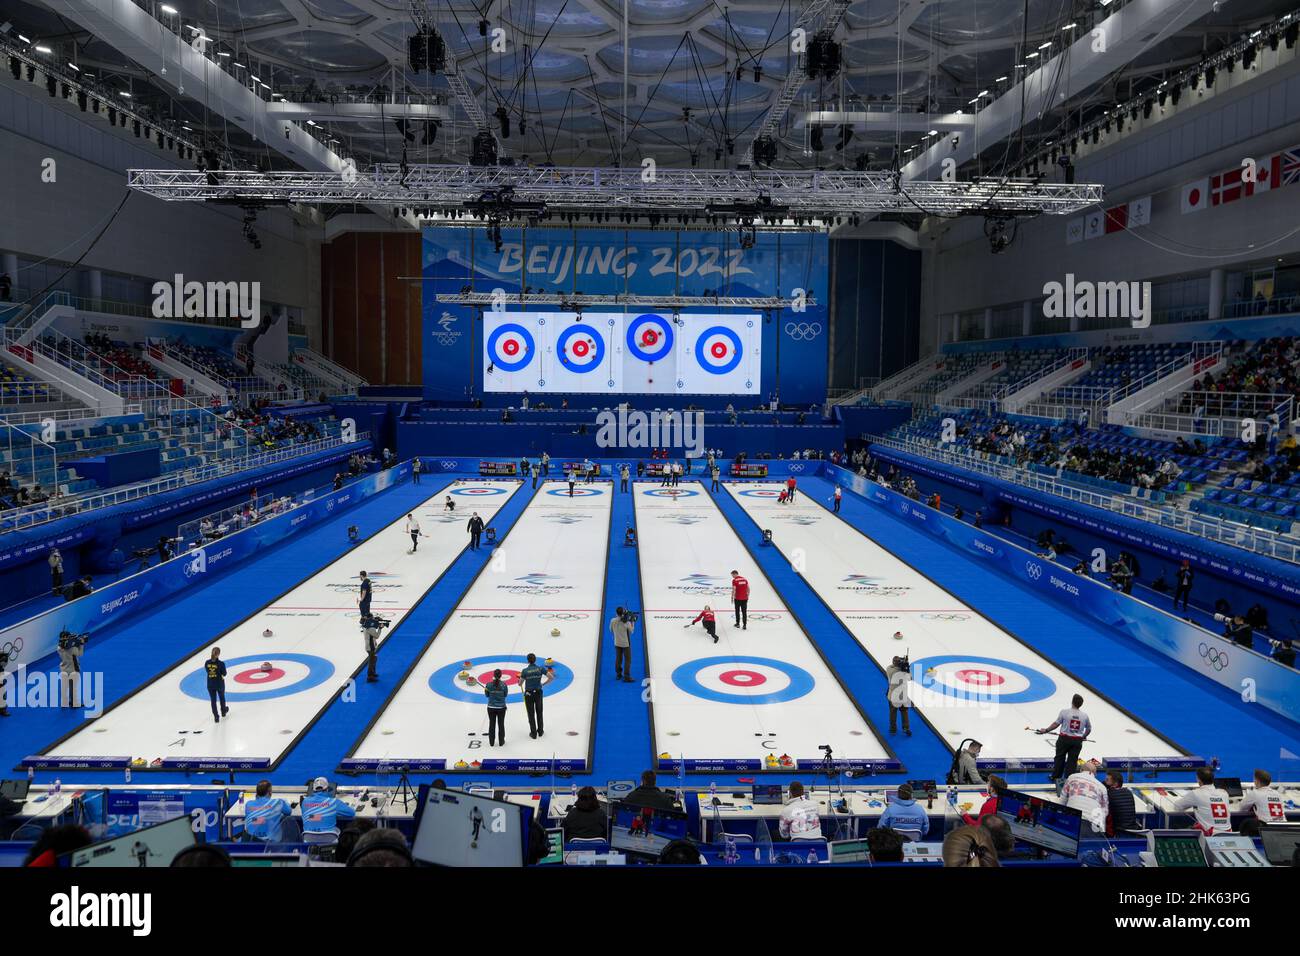 Beijing, China. 02nd Feb, 2022. General view of the Aquatics center during the Mixed Doubles round robin session 1 curling competition at the Beijing 2022 Winter Olympics on Wednesday, February 2, 2022. Photo by Paul Hanna/UPI Credit: UPI/Alamy Live News Stock Photo